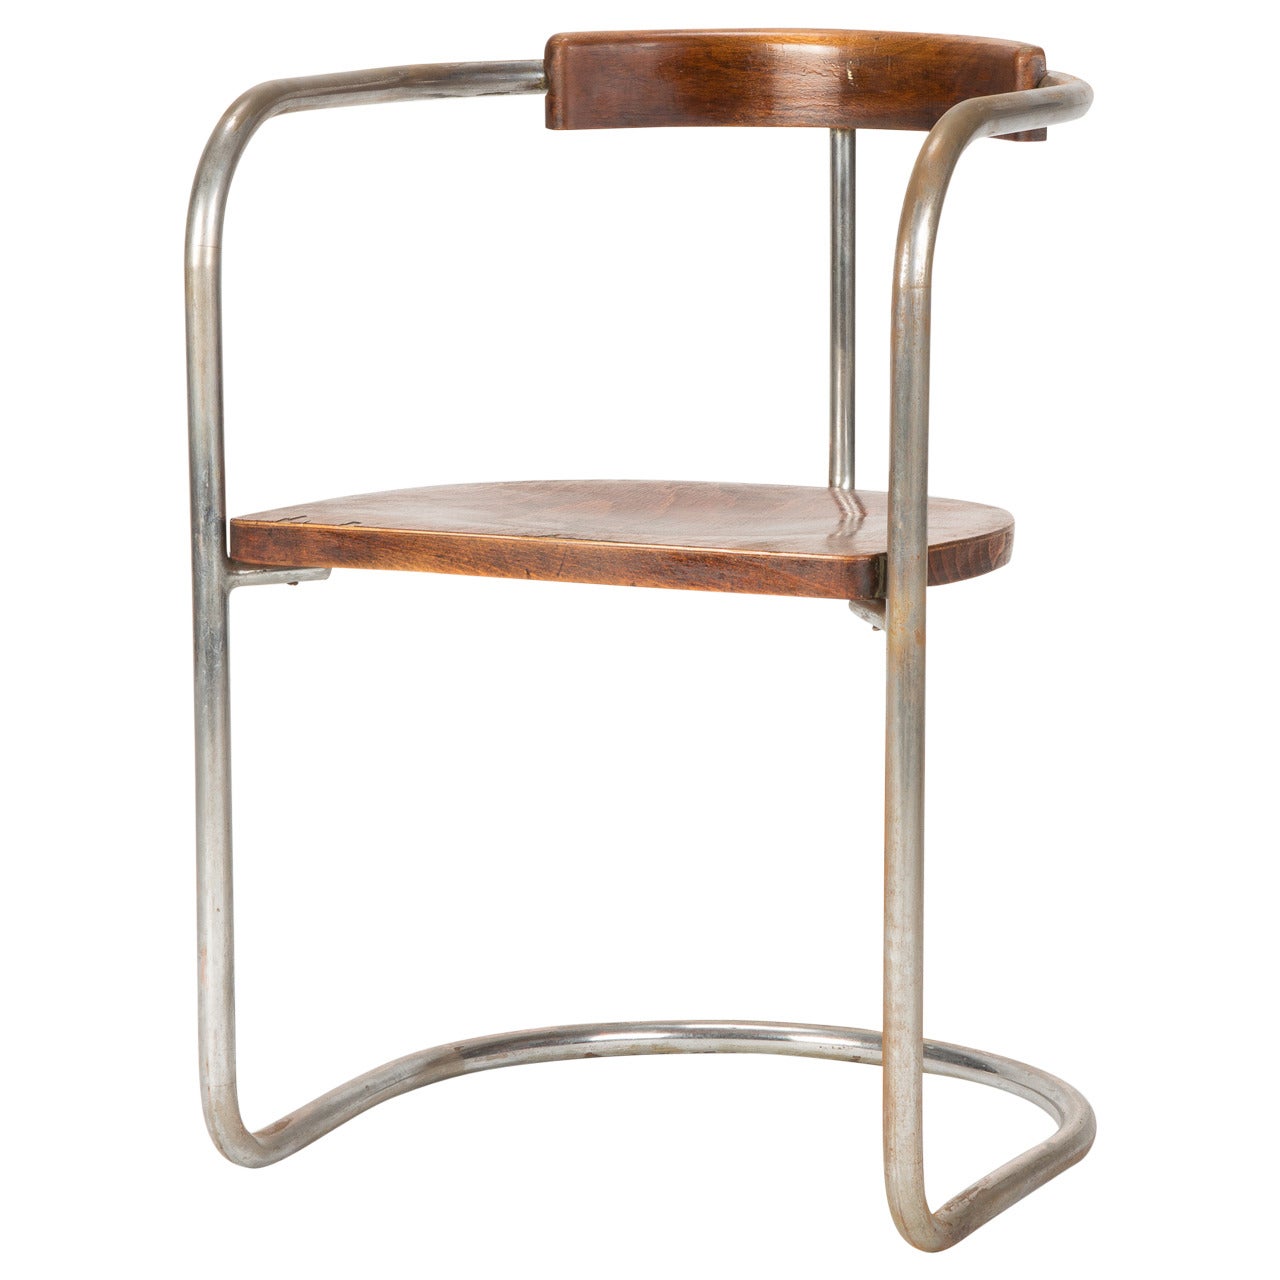 Antique Bauhaus Steel Tube Cantilever Chair, Italy, 1930s For Sale